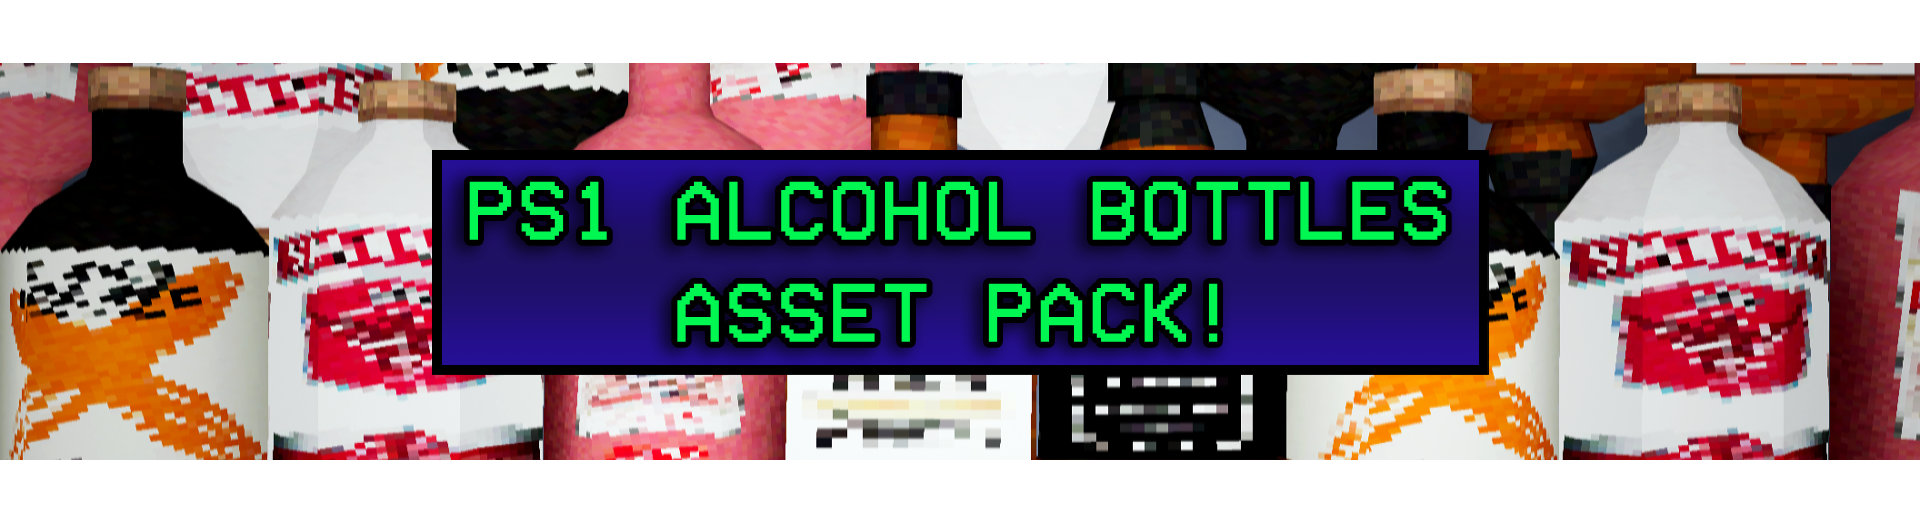 PSX PS1 Alcohol Bottles Low Poly - Free Asset Pack!